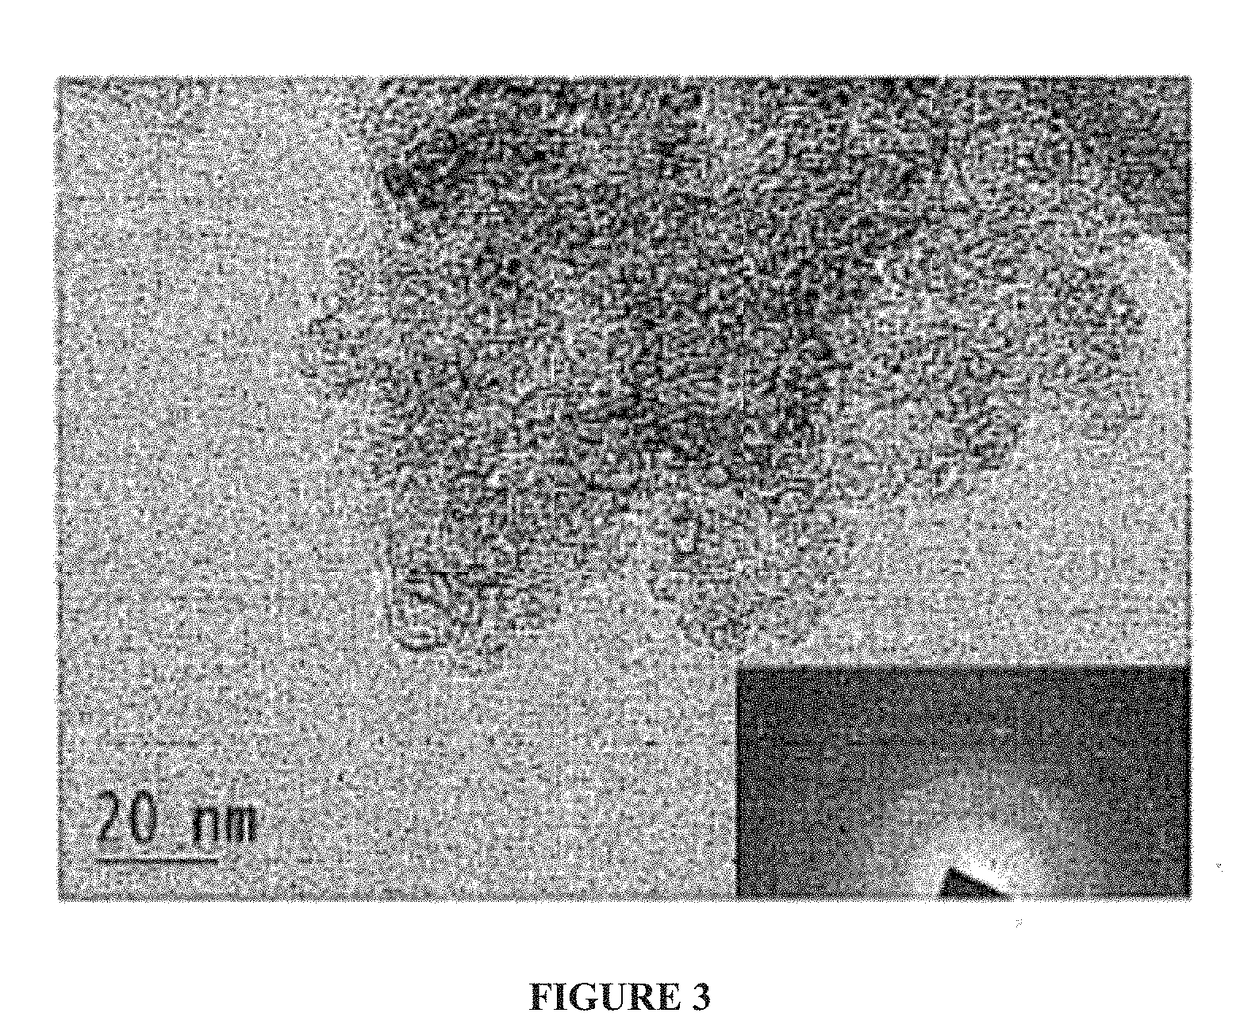 Composition comprising nucleated nanodiamond particles